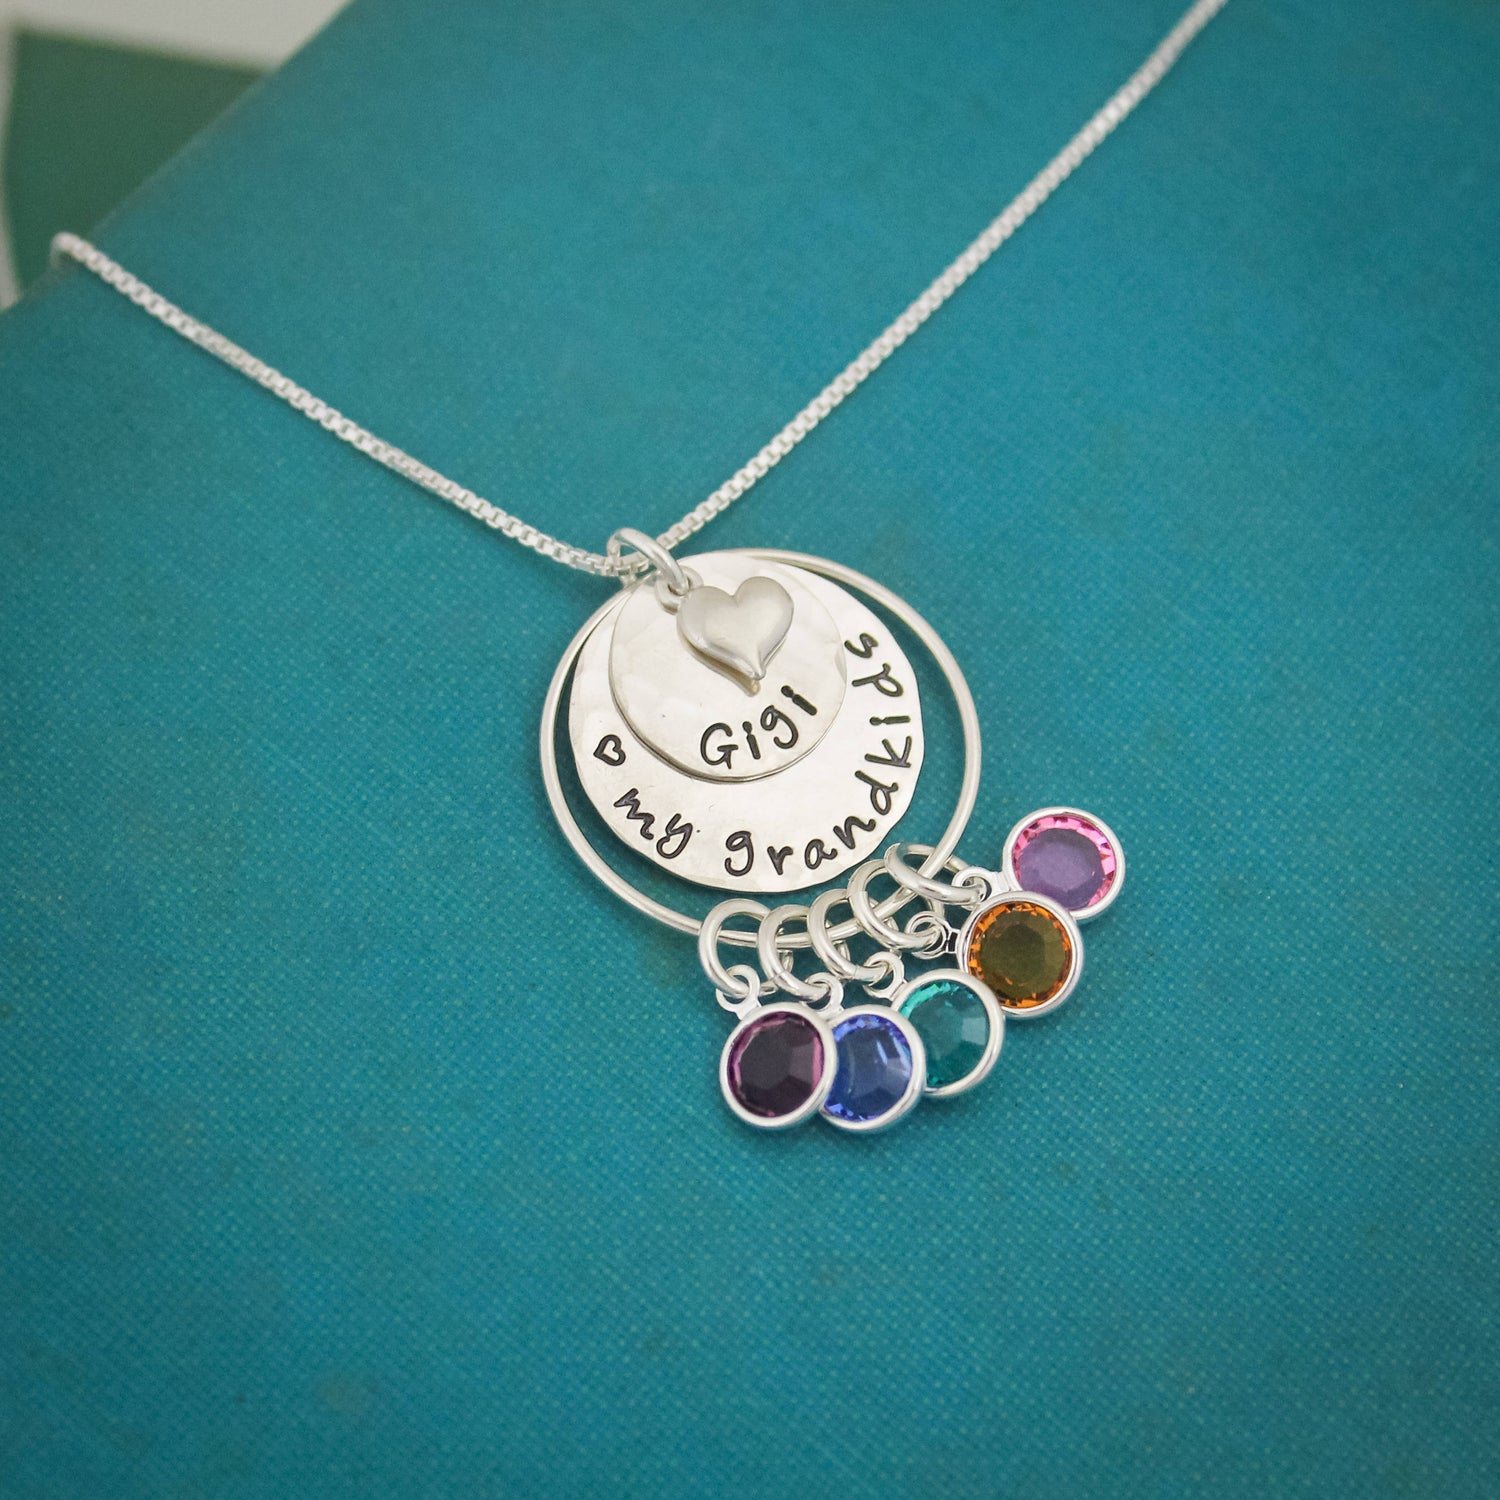 Sterling silver mothers necklace with 6 birthstones 6 child names and  stones customized engraved silver jewelry for women grandma gift for her  mom gift mothers day personalized pendant necklace with my name,